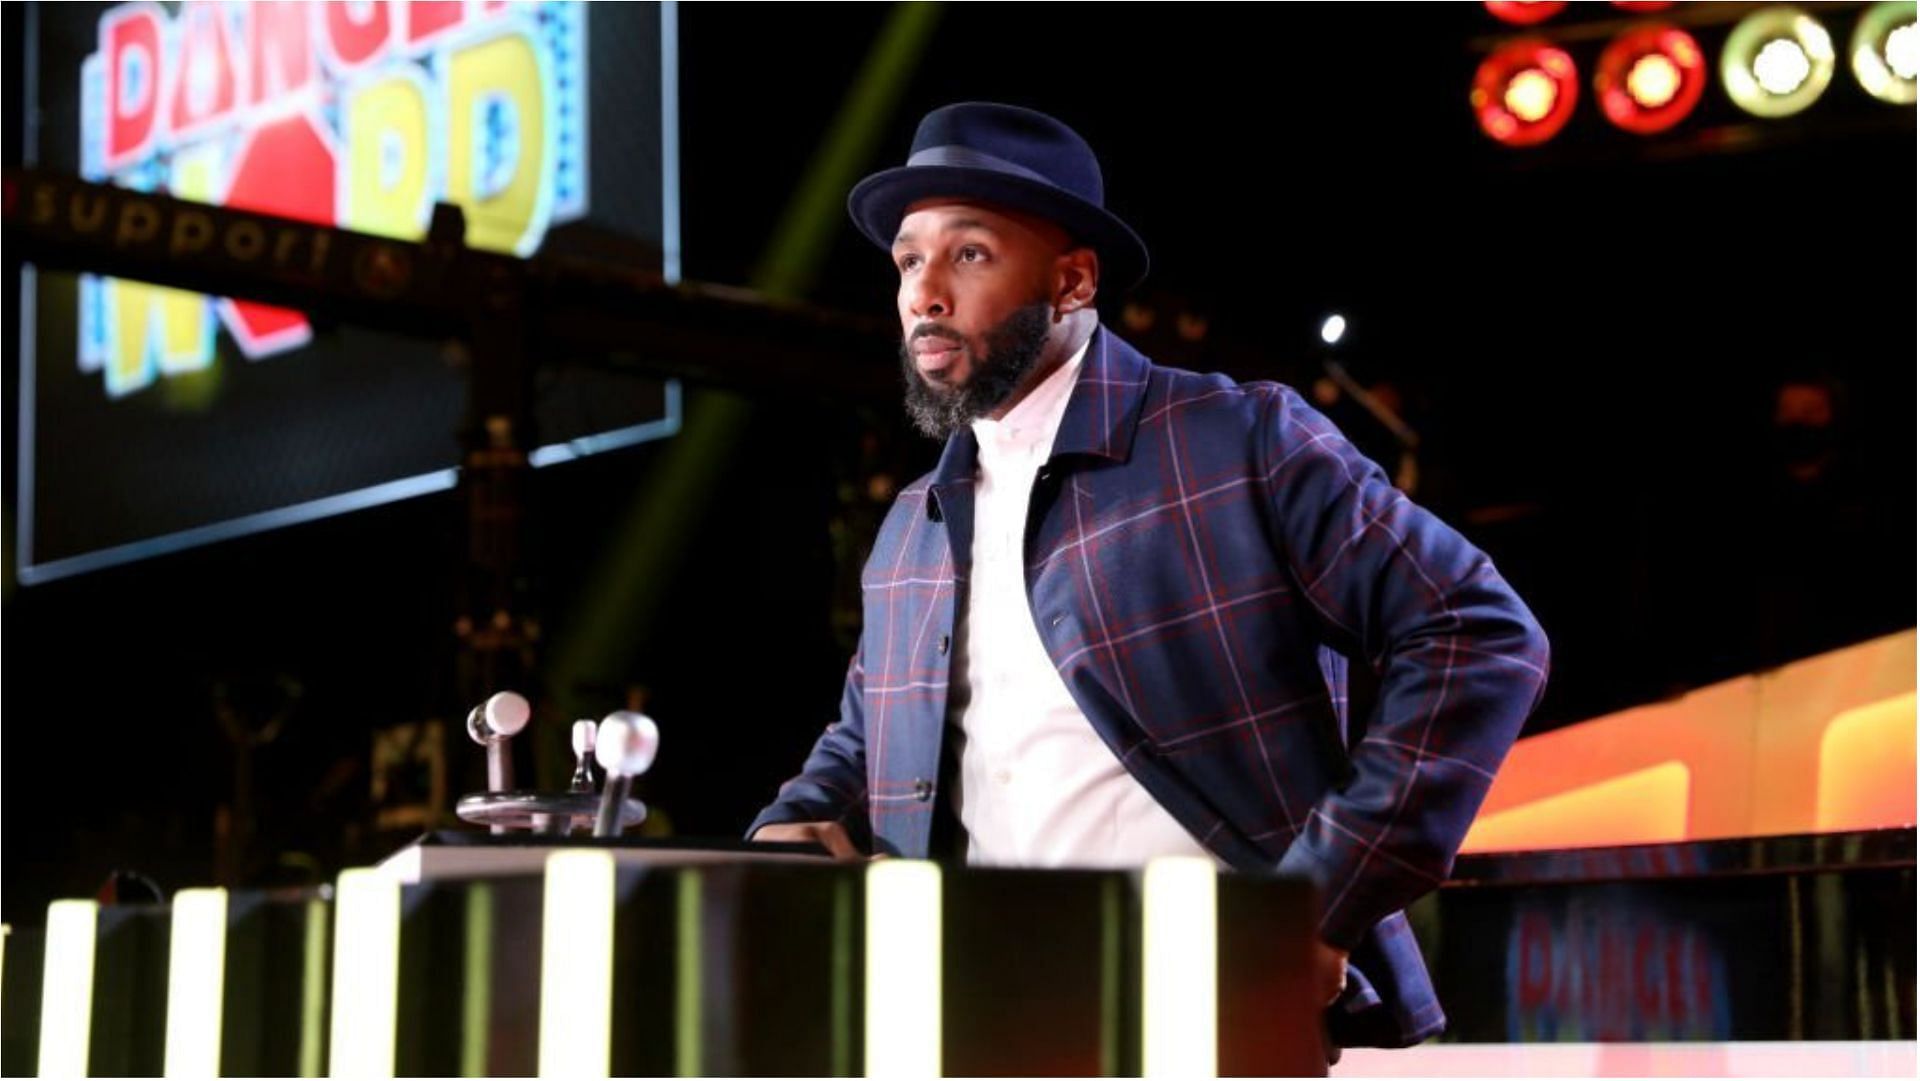 DJ Stephen tWitch was known for his appearances on television and films (Image via Mike Rozman/Getty Images)